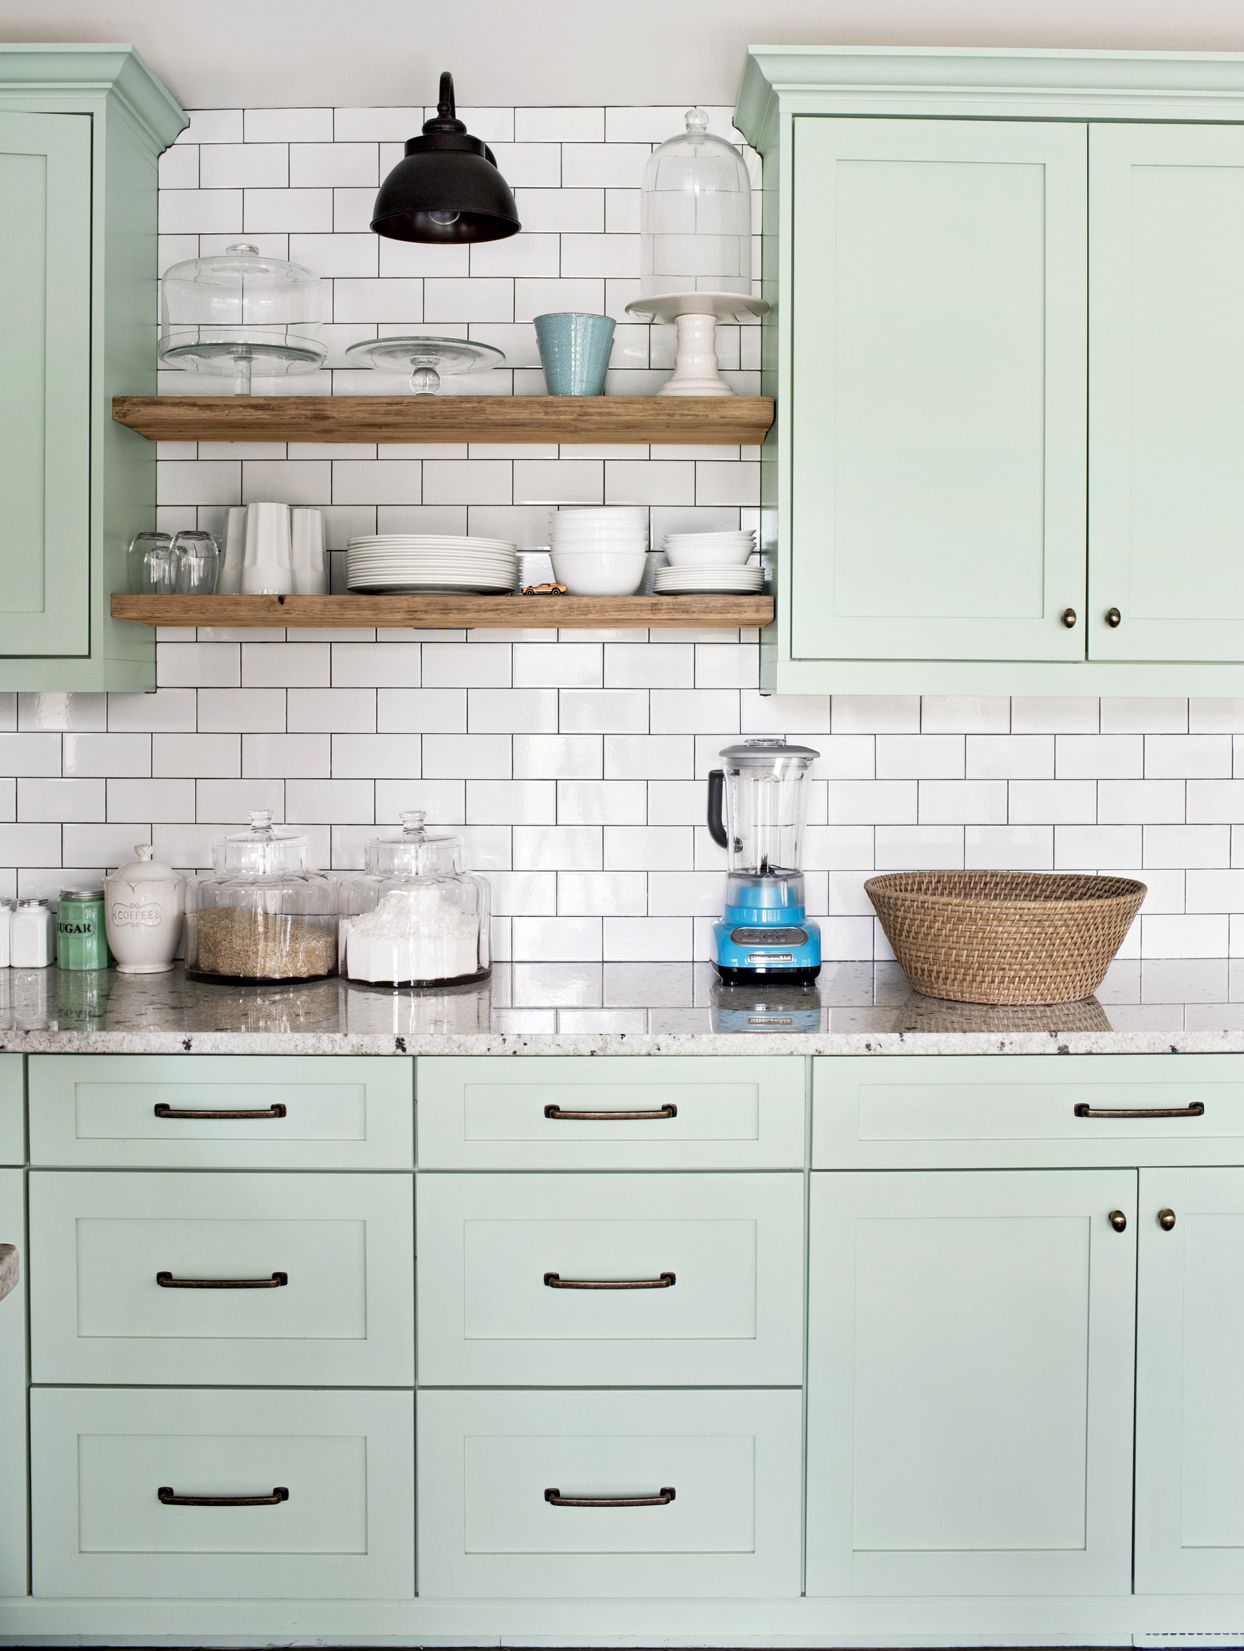 What's the most popular kitchen cabinet color